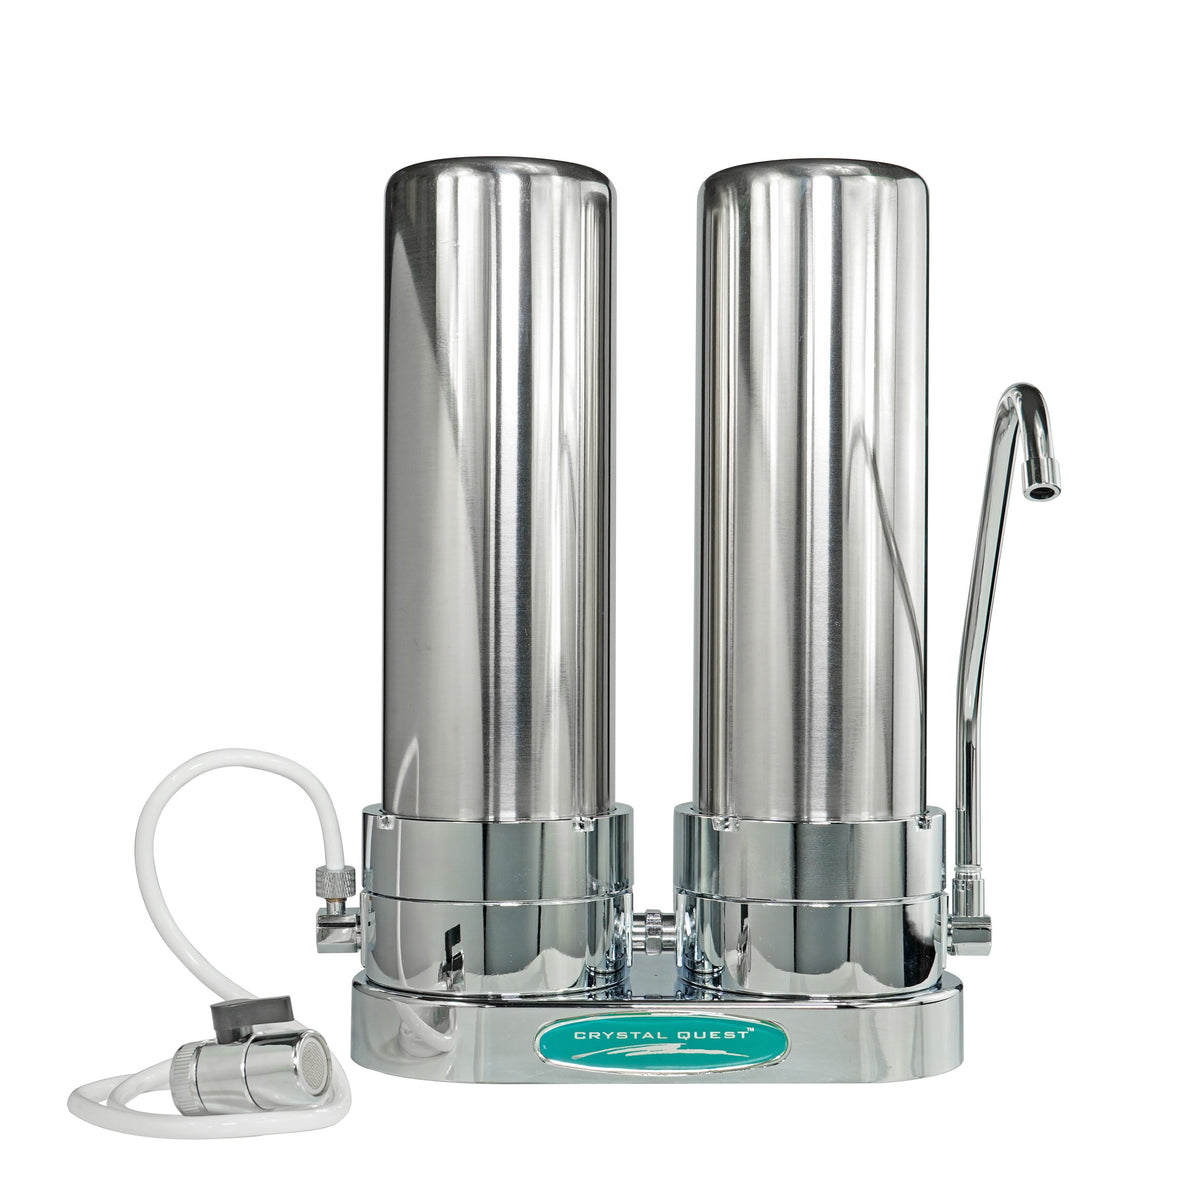 Double / Stainless Steel Lead Countertop Water Filter System - Countertop Water Filters - Crystal Quest